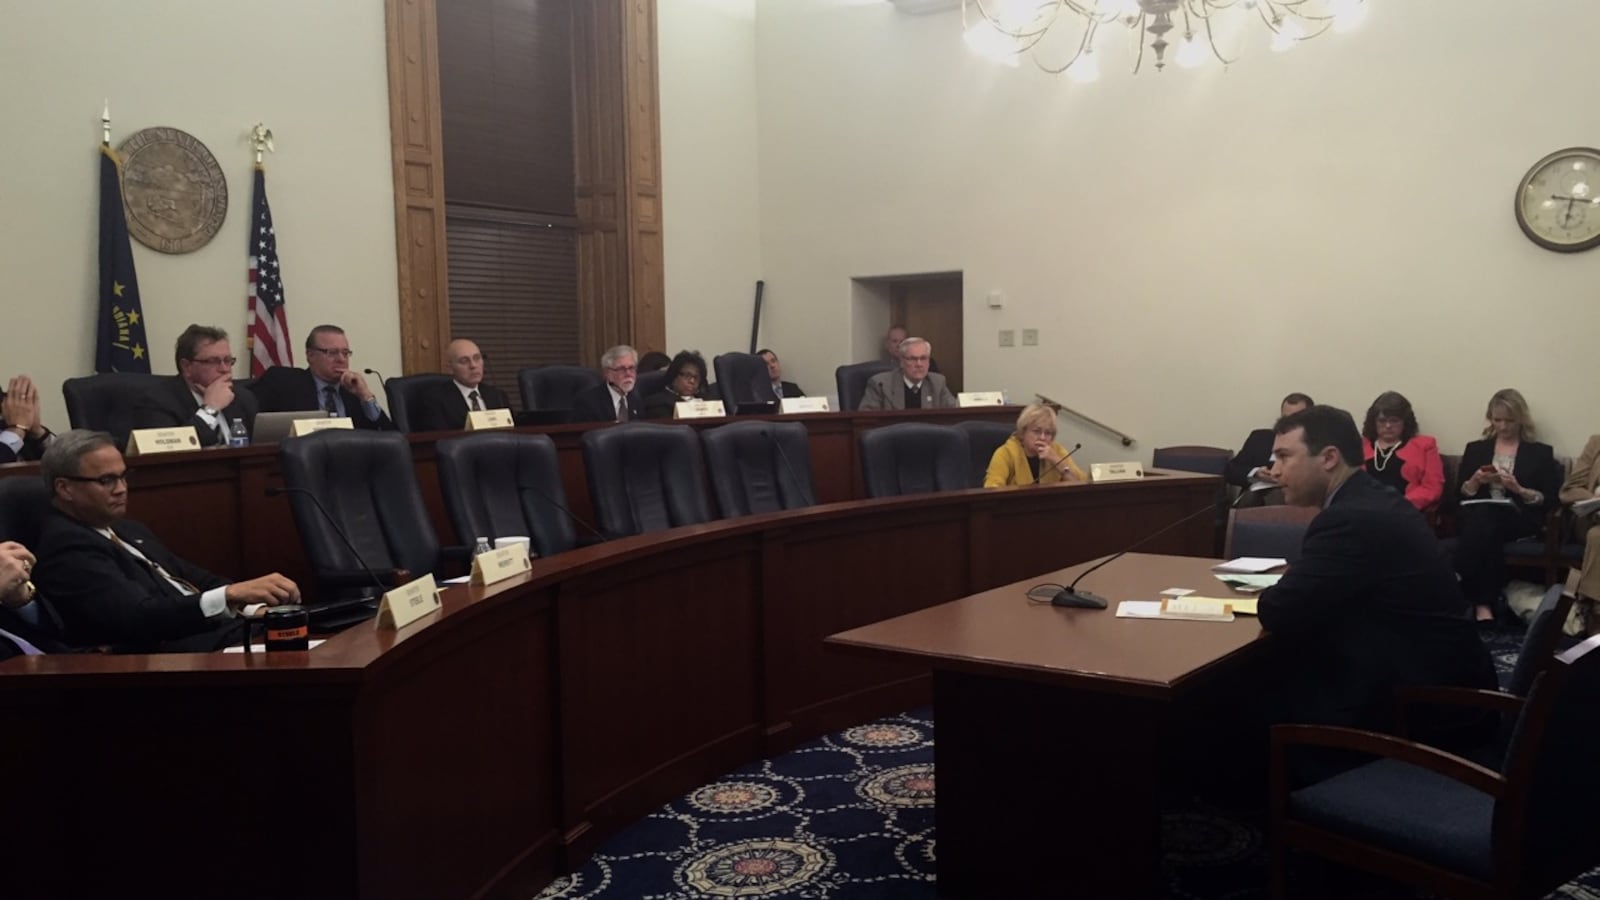 The Senate Rules Committee heard testimony from those supporting and opposing Senate Bill 1, which would remove State Superintendent Glenda Ritz as chairwoman of the Indiana State Board of Education.